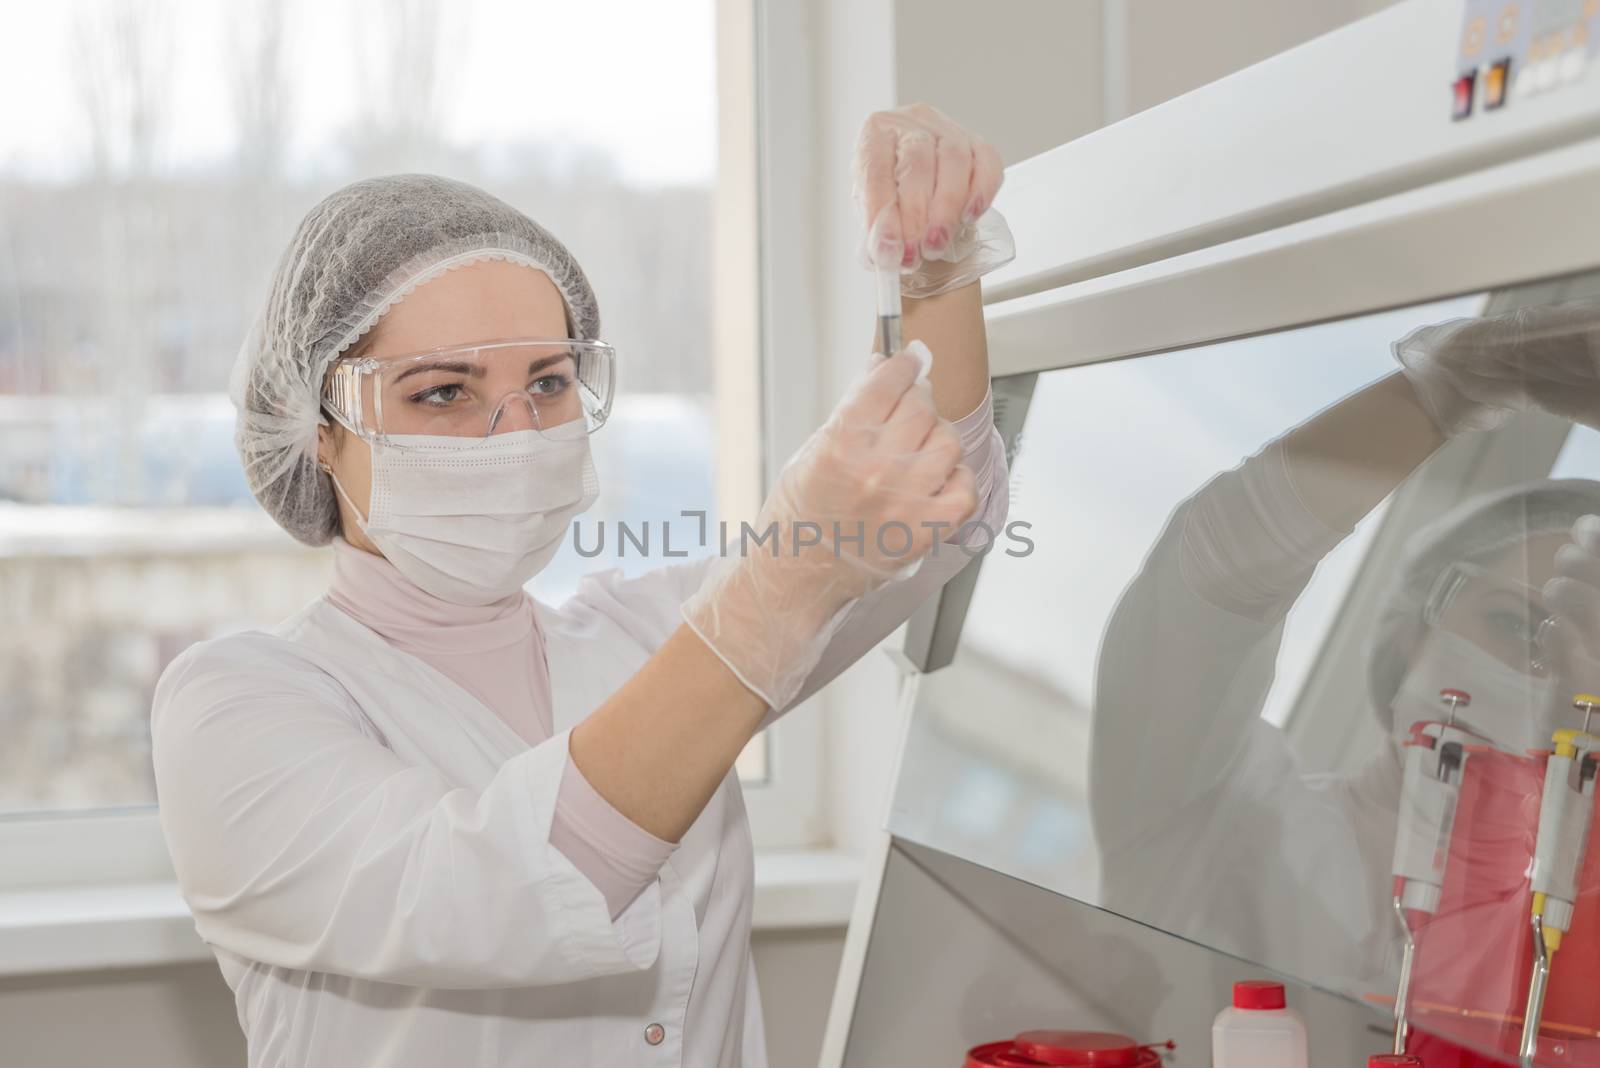 Woman scientist in a white protective clothing conducts research in a real lab